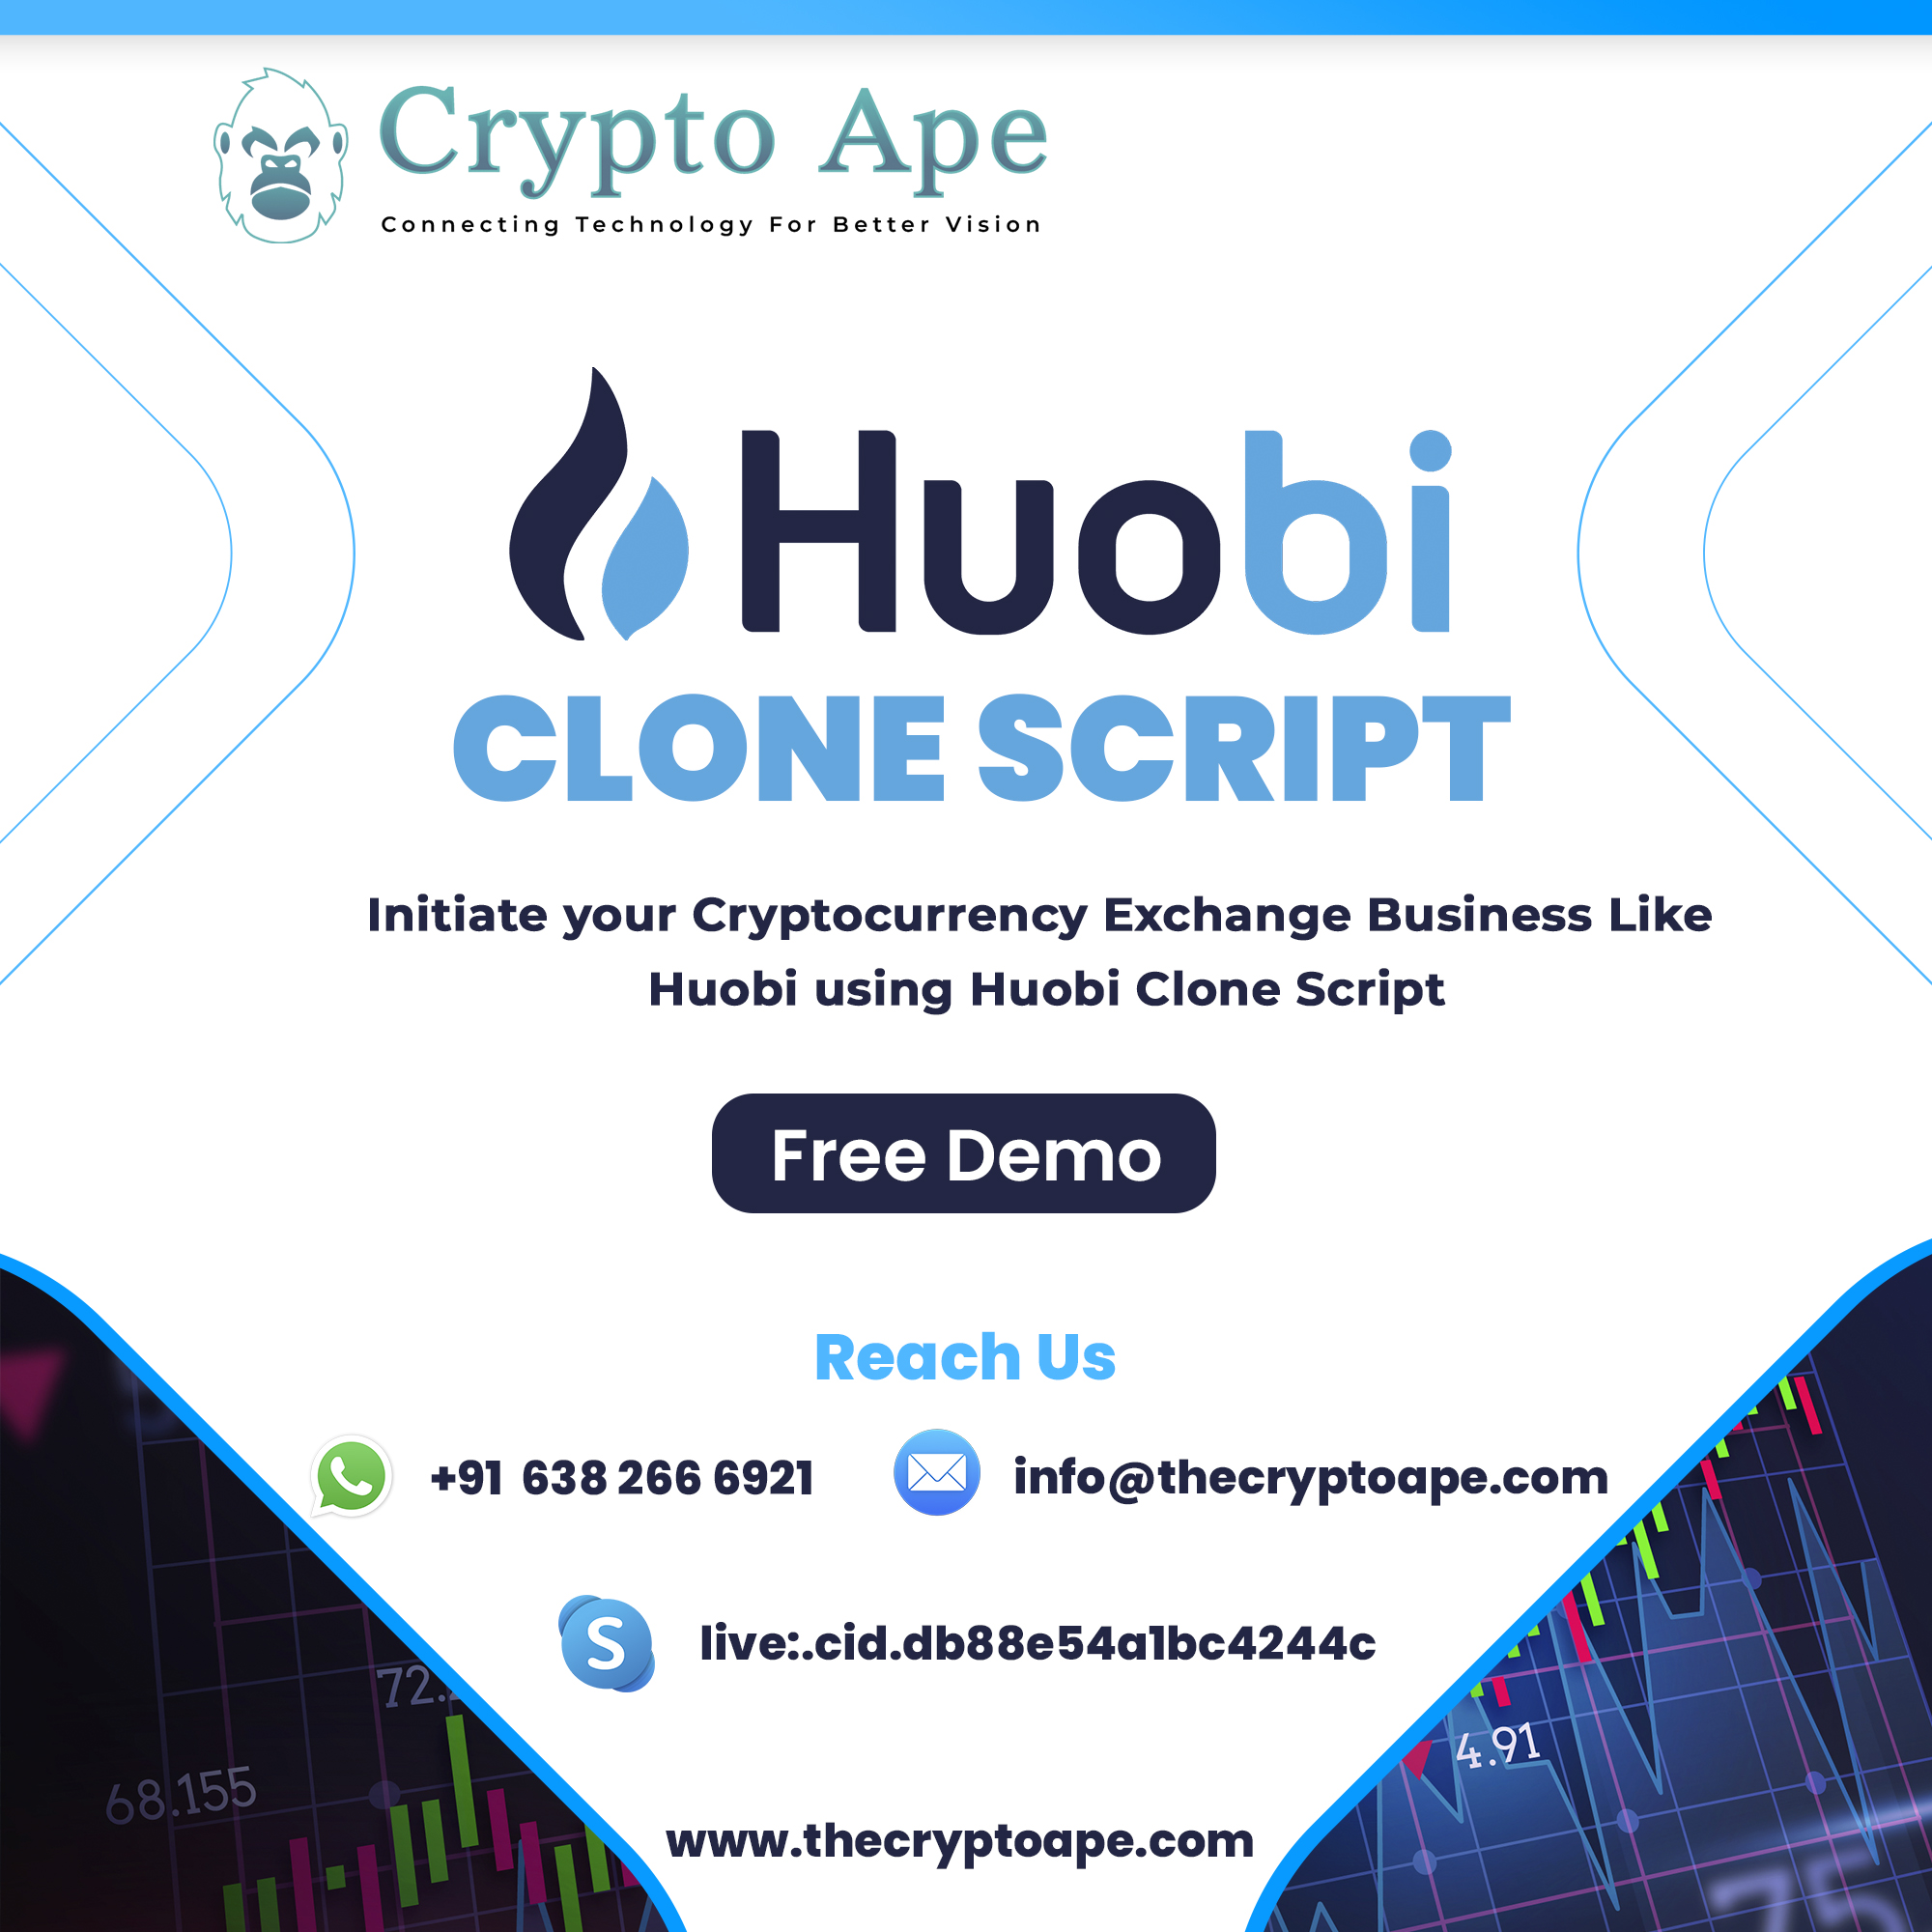 Article about Benefits for Entrepreneur to Launching a Crytpocurrency Exchange Like Huobi